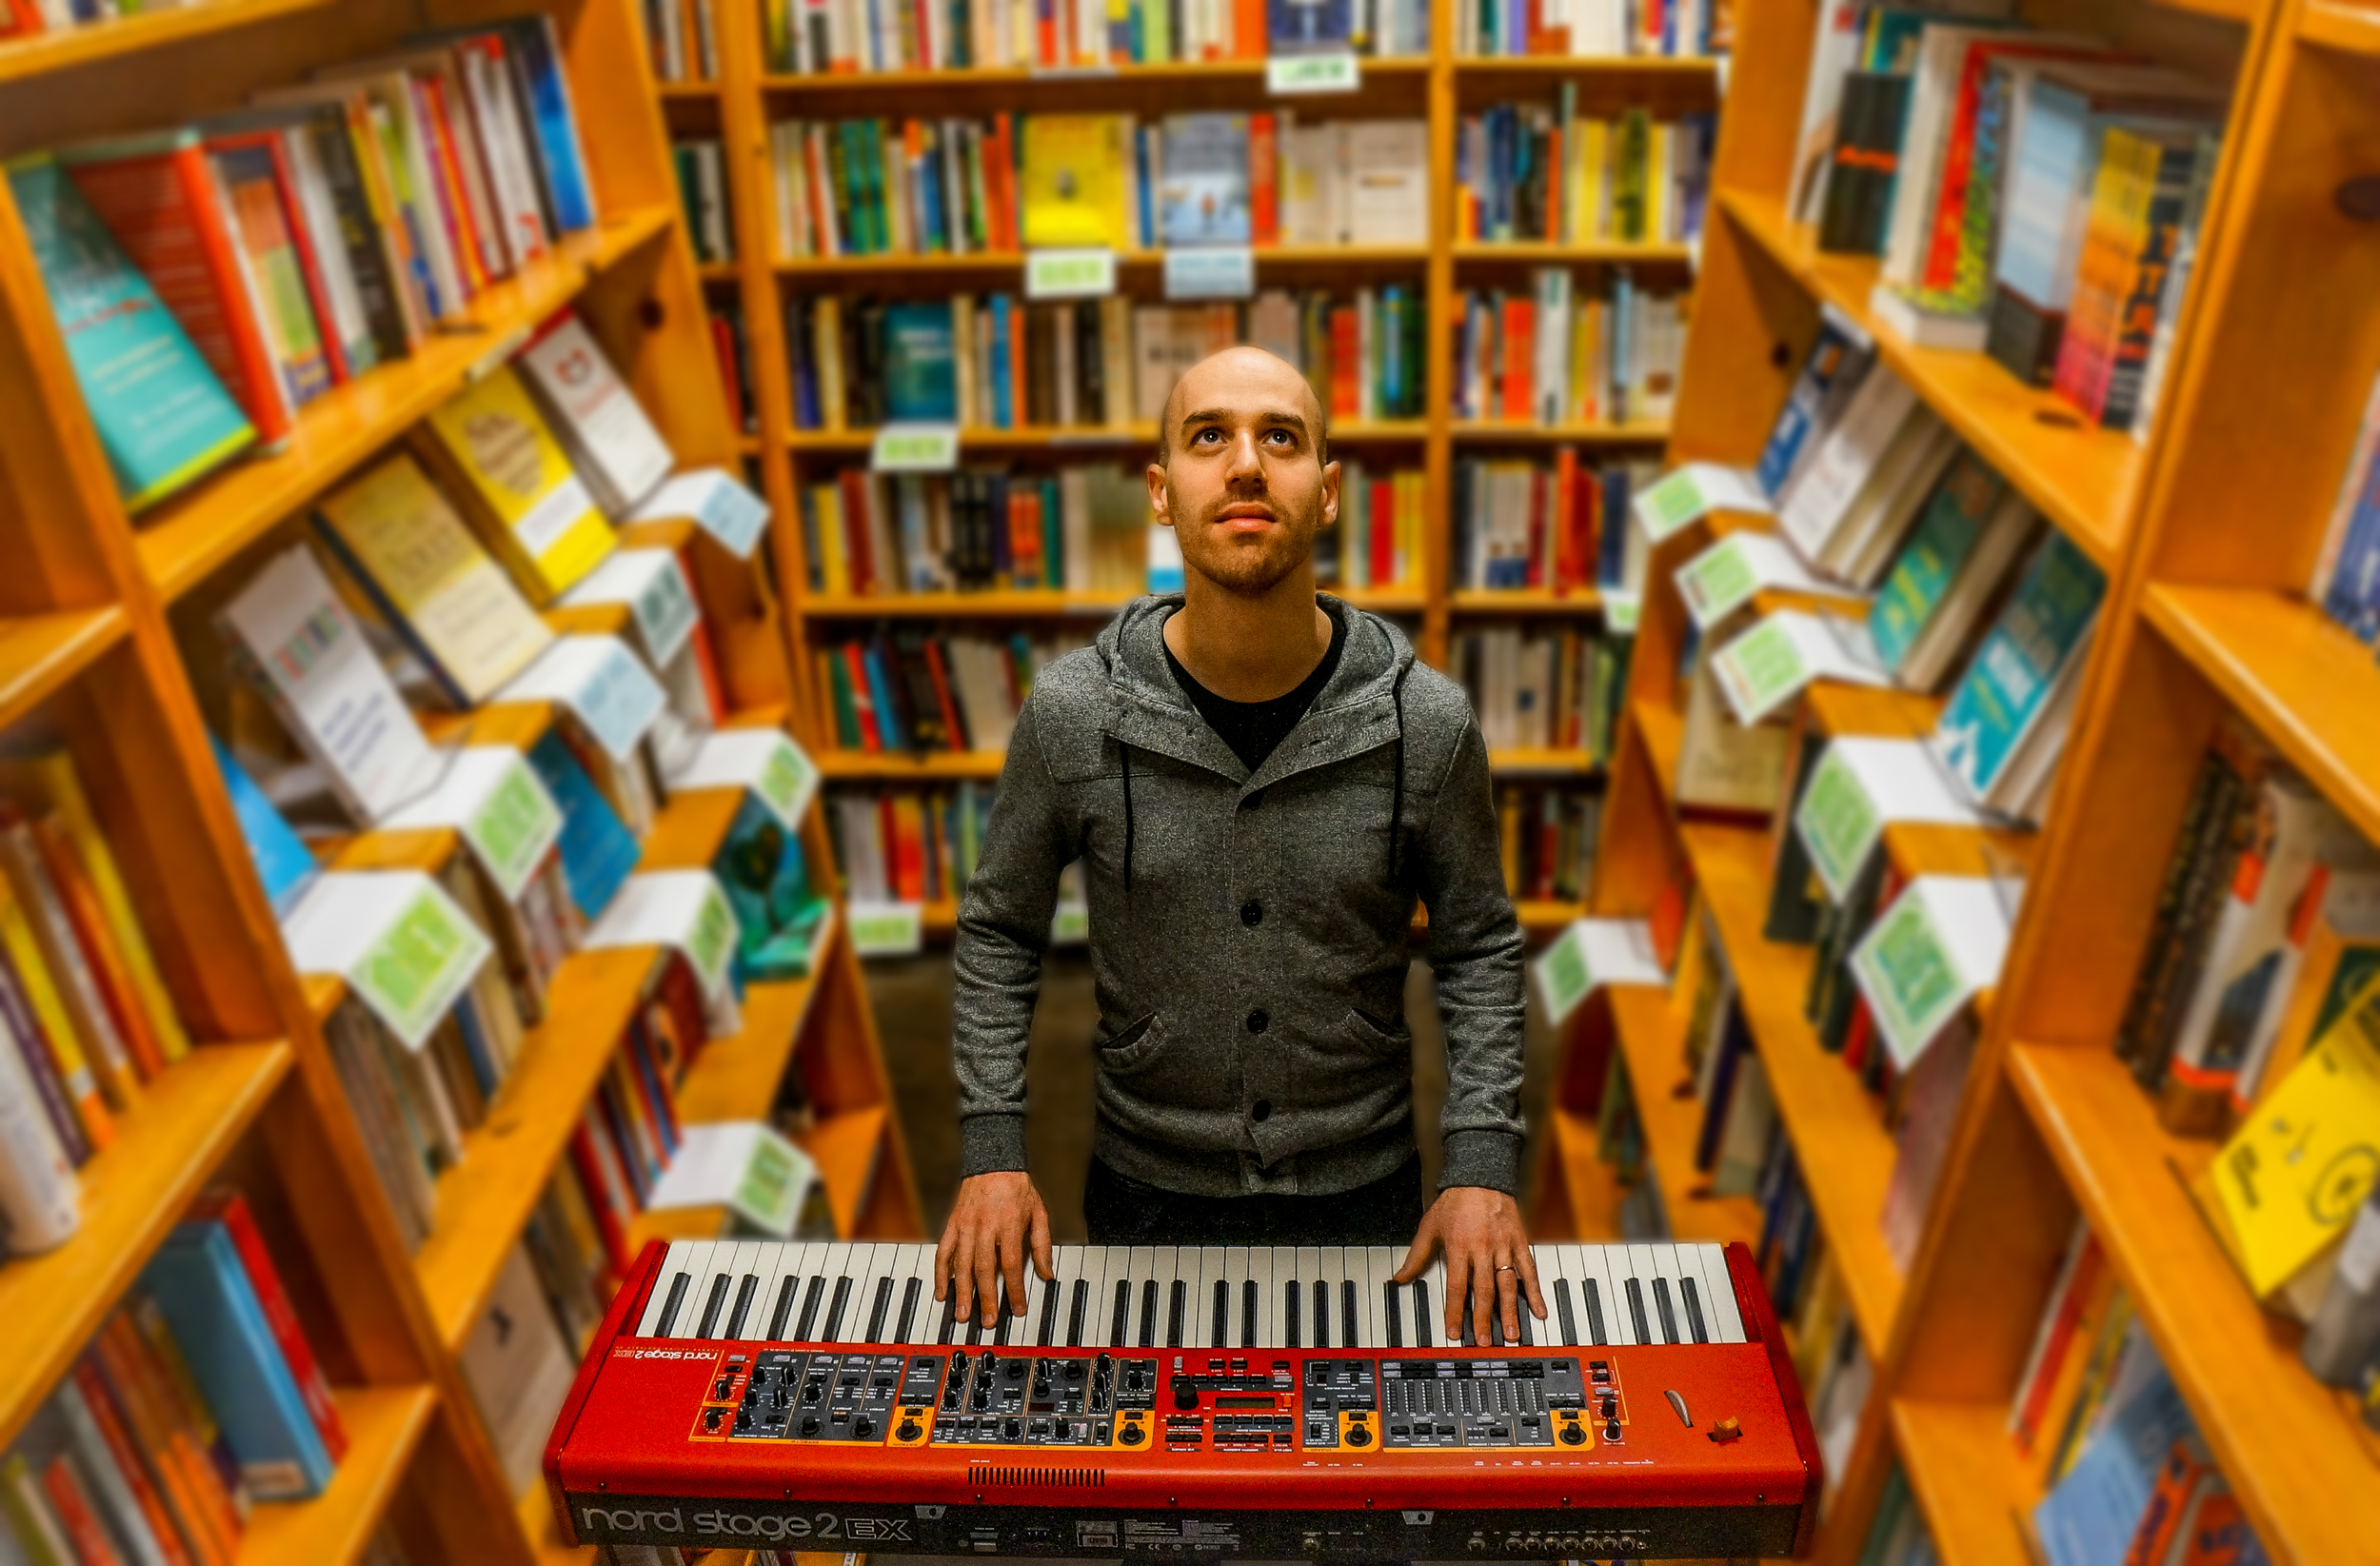 Man in grey hoodie playing red keyboard between shelves of books in a bookstore.